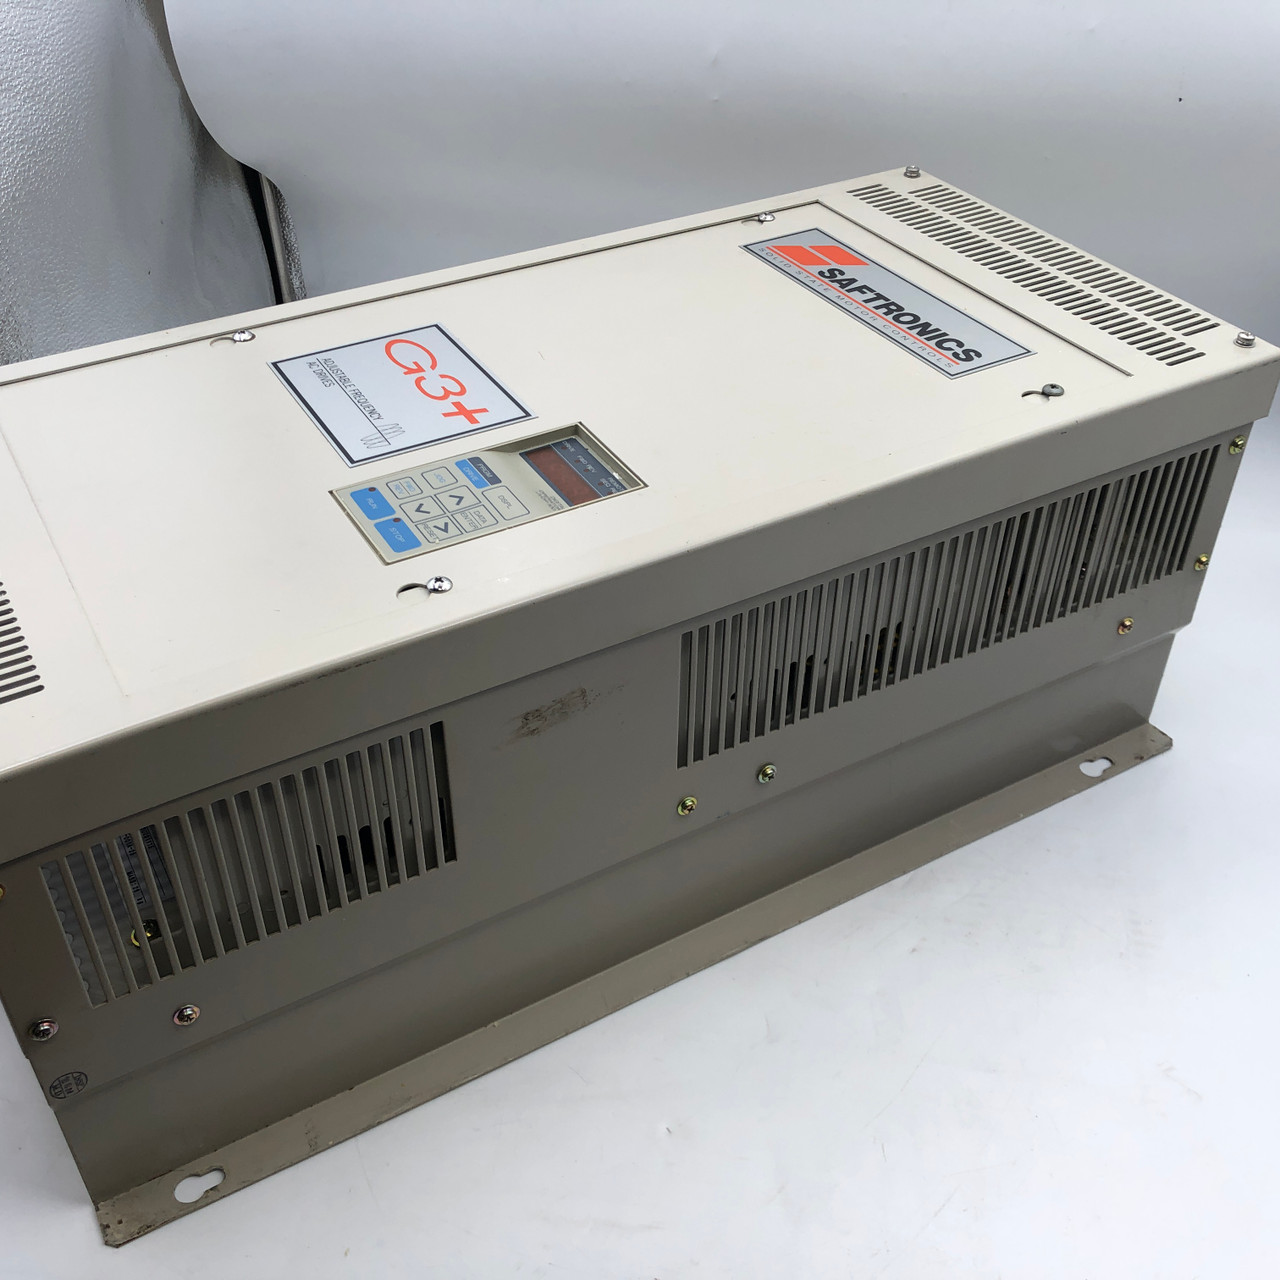 SAFTRONICS CIMR-G3U2011+ 0-230VAC 0-400HZ 3 PHASE VARIABLE FREQUENCY AC DRIVE